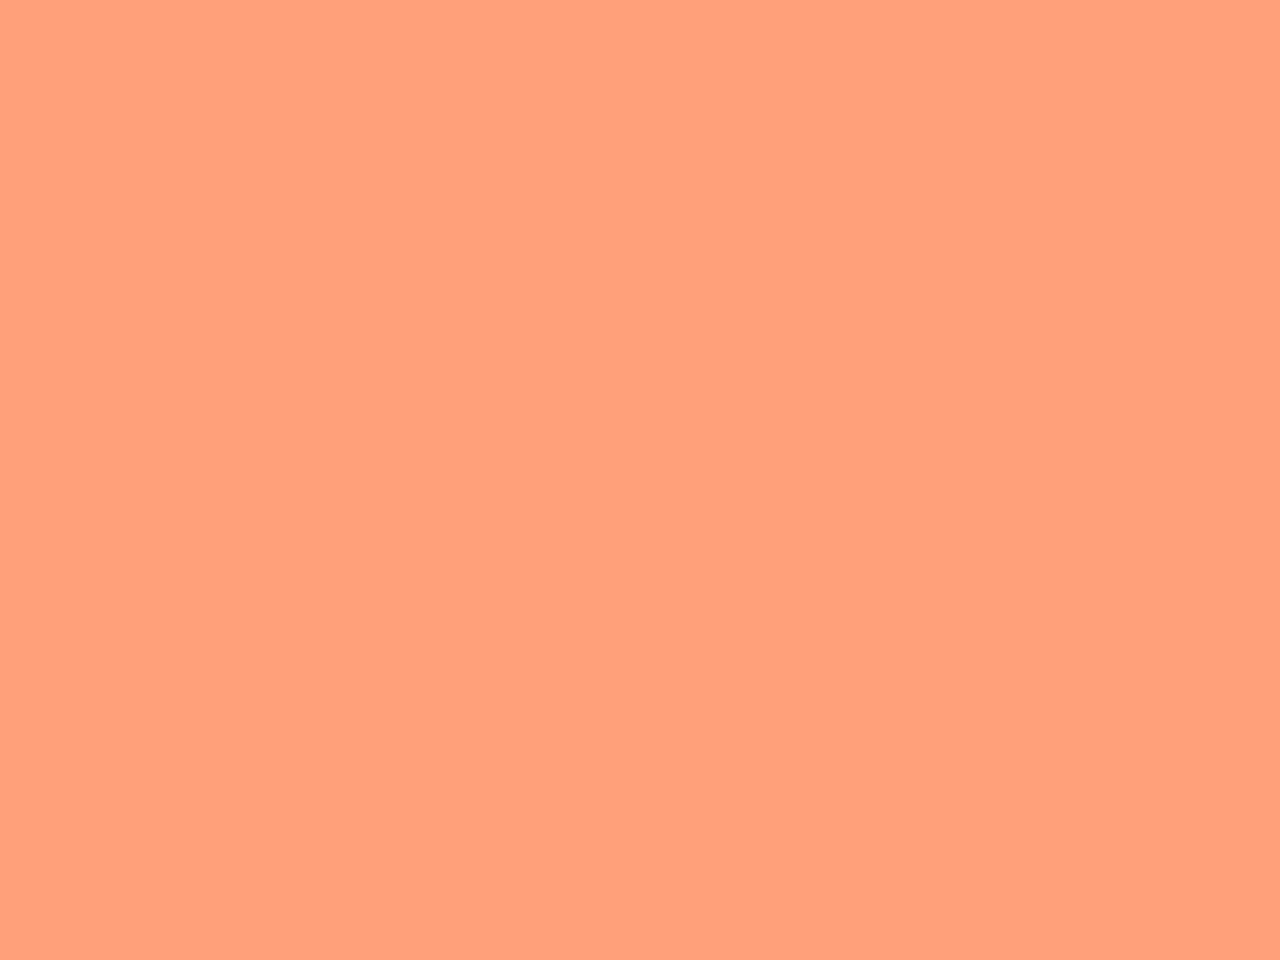 1280x960 Light Salmon Solid Color Background